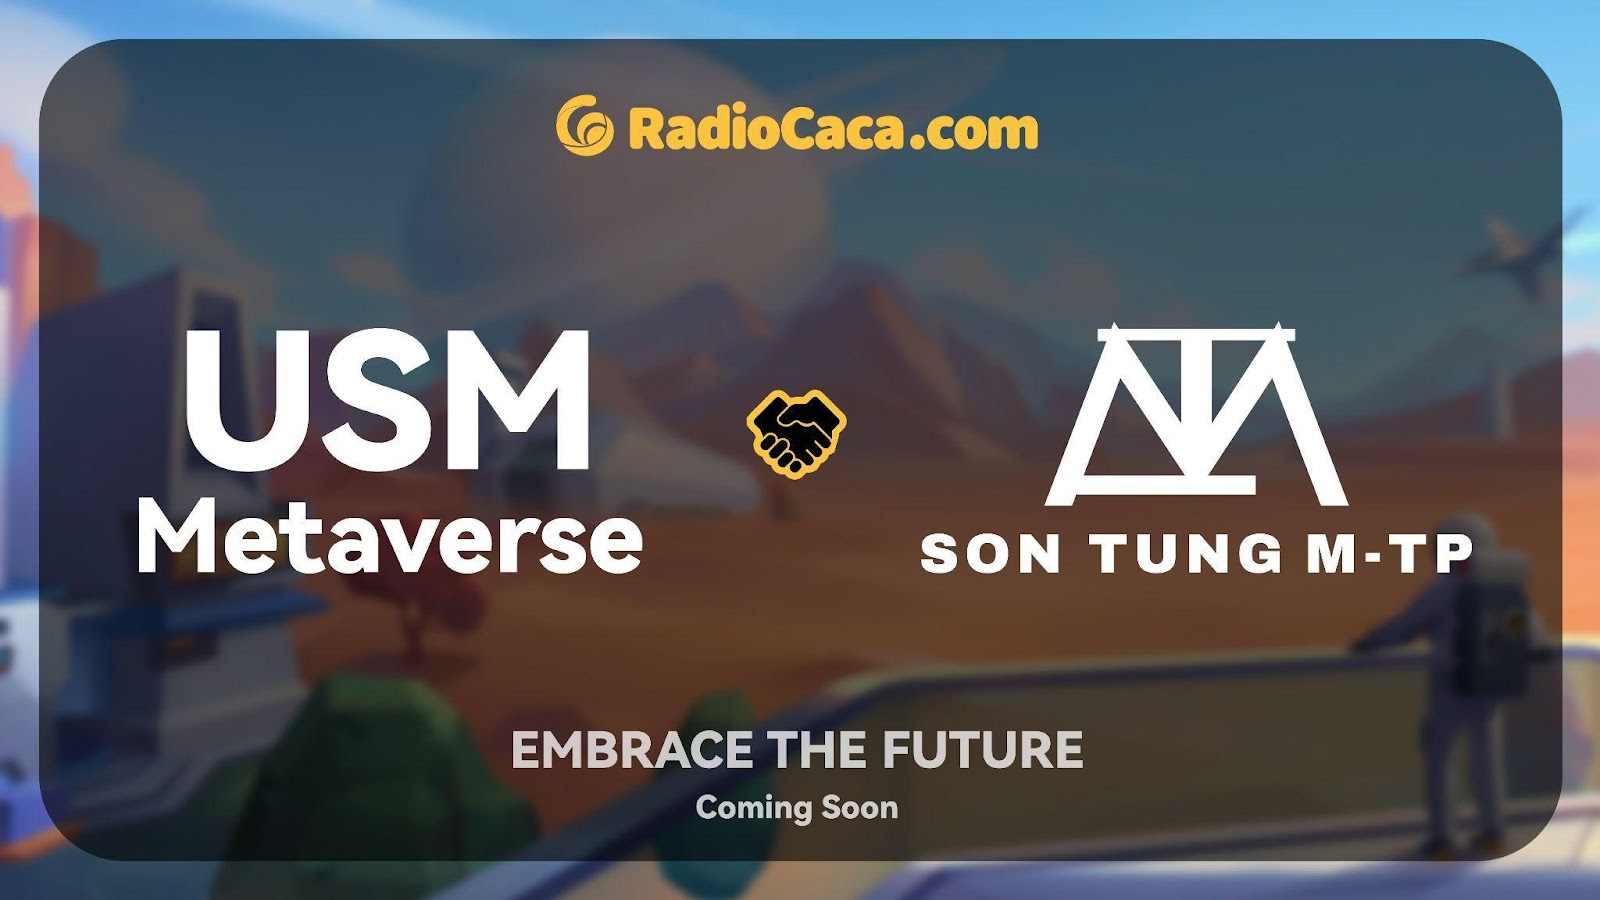 Following French Montana, Son Tung M-TP, One of Vietnam’s Top Celebrity Singers, Joins Radio Caca’s USM Metaverse